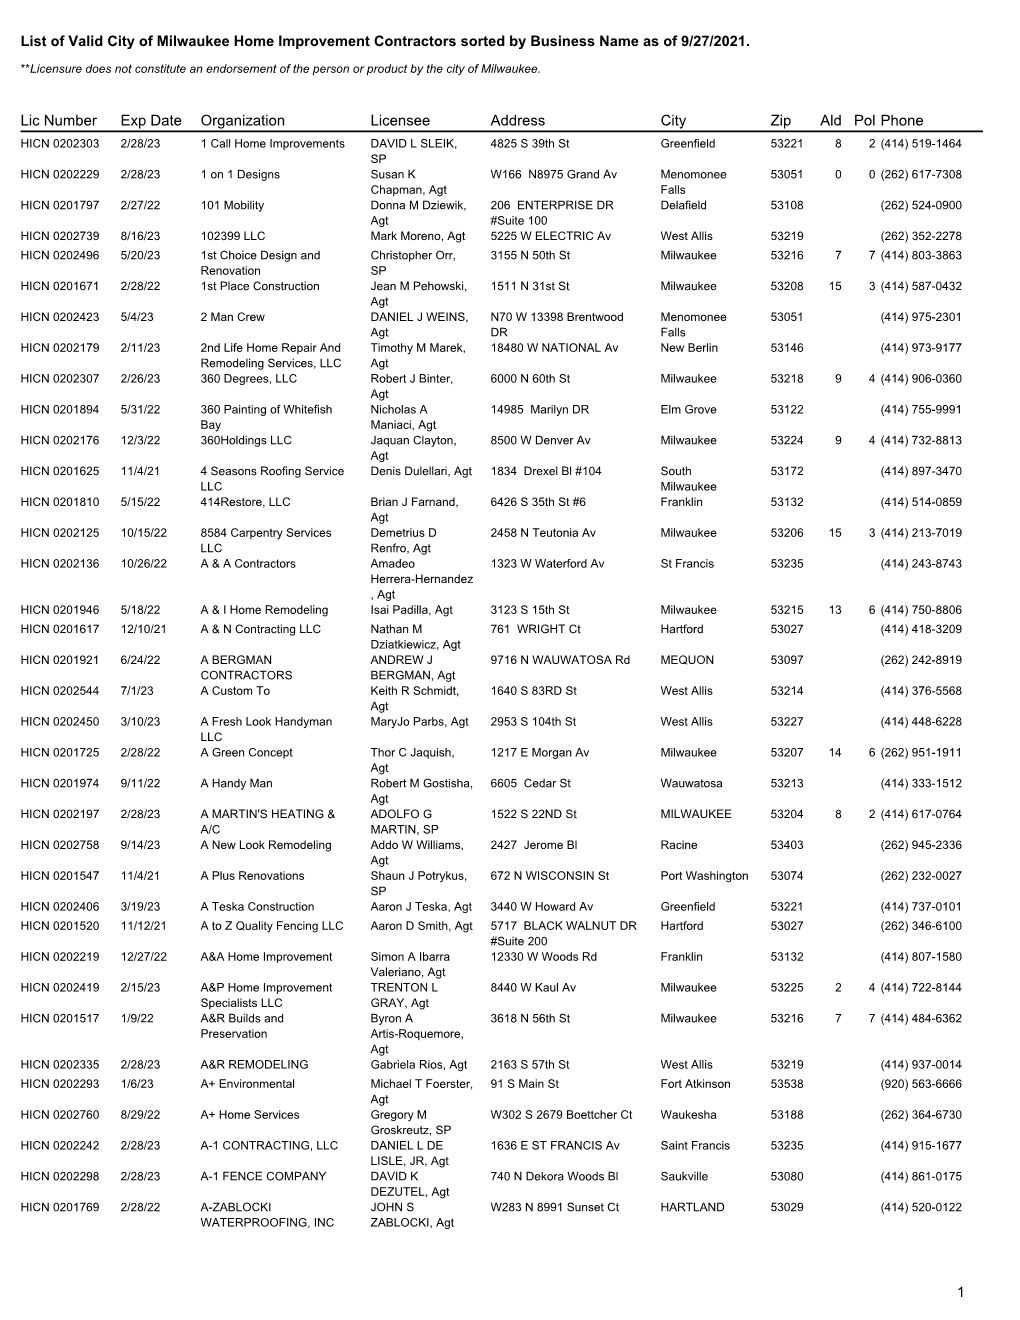 List of Valid City of Milwaukee Home Improvement Contractors Sorted by Business Name As of 9/27/2021